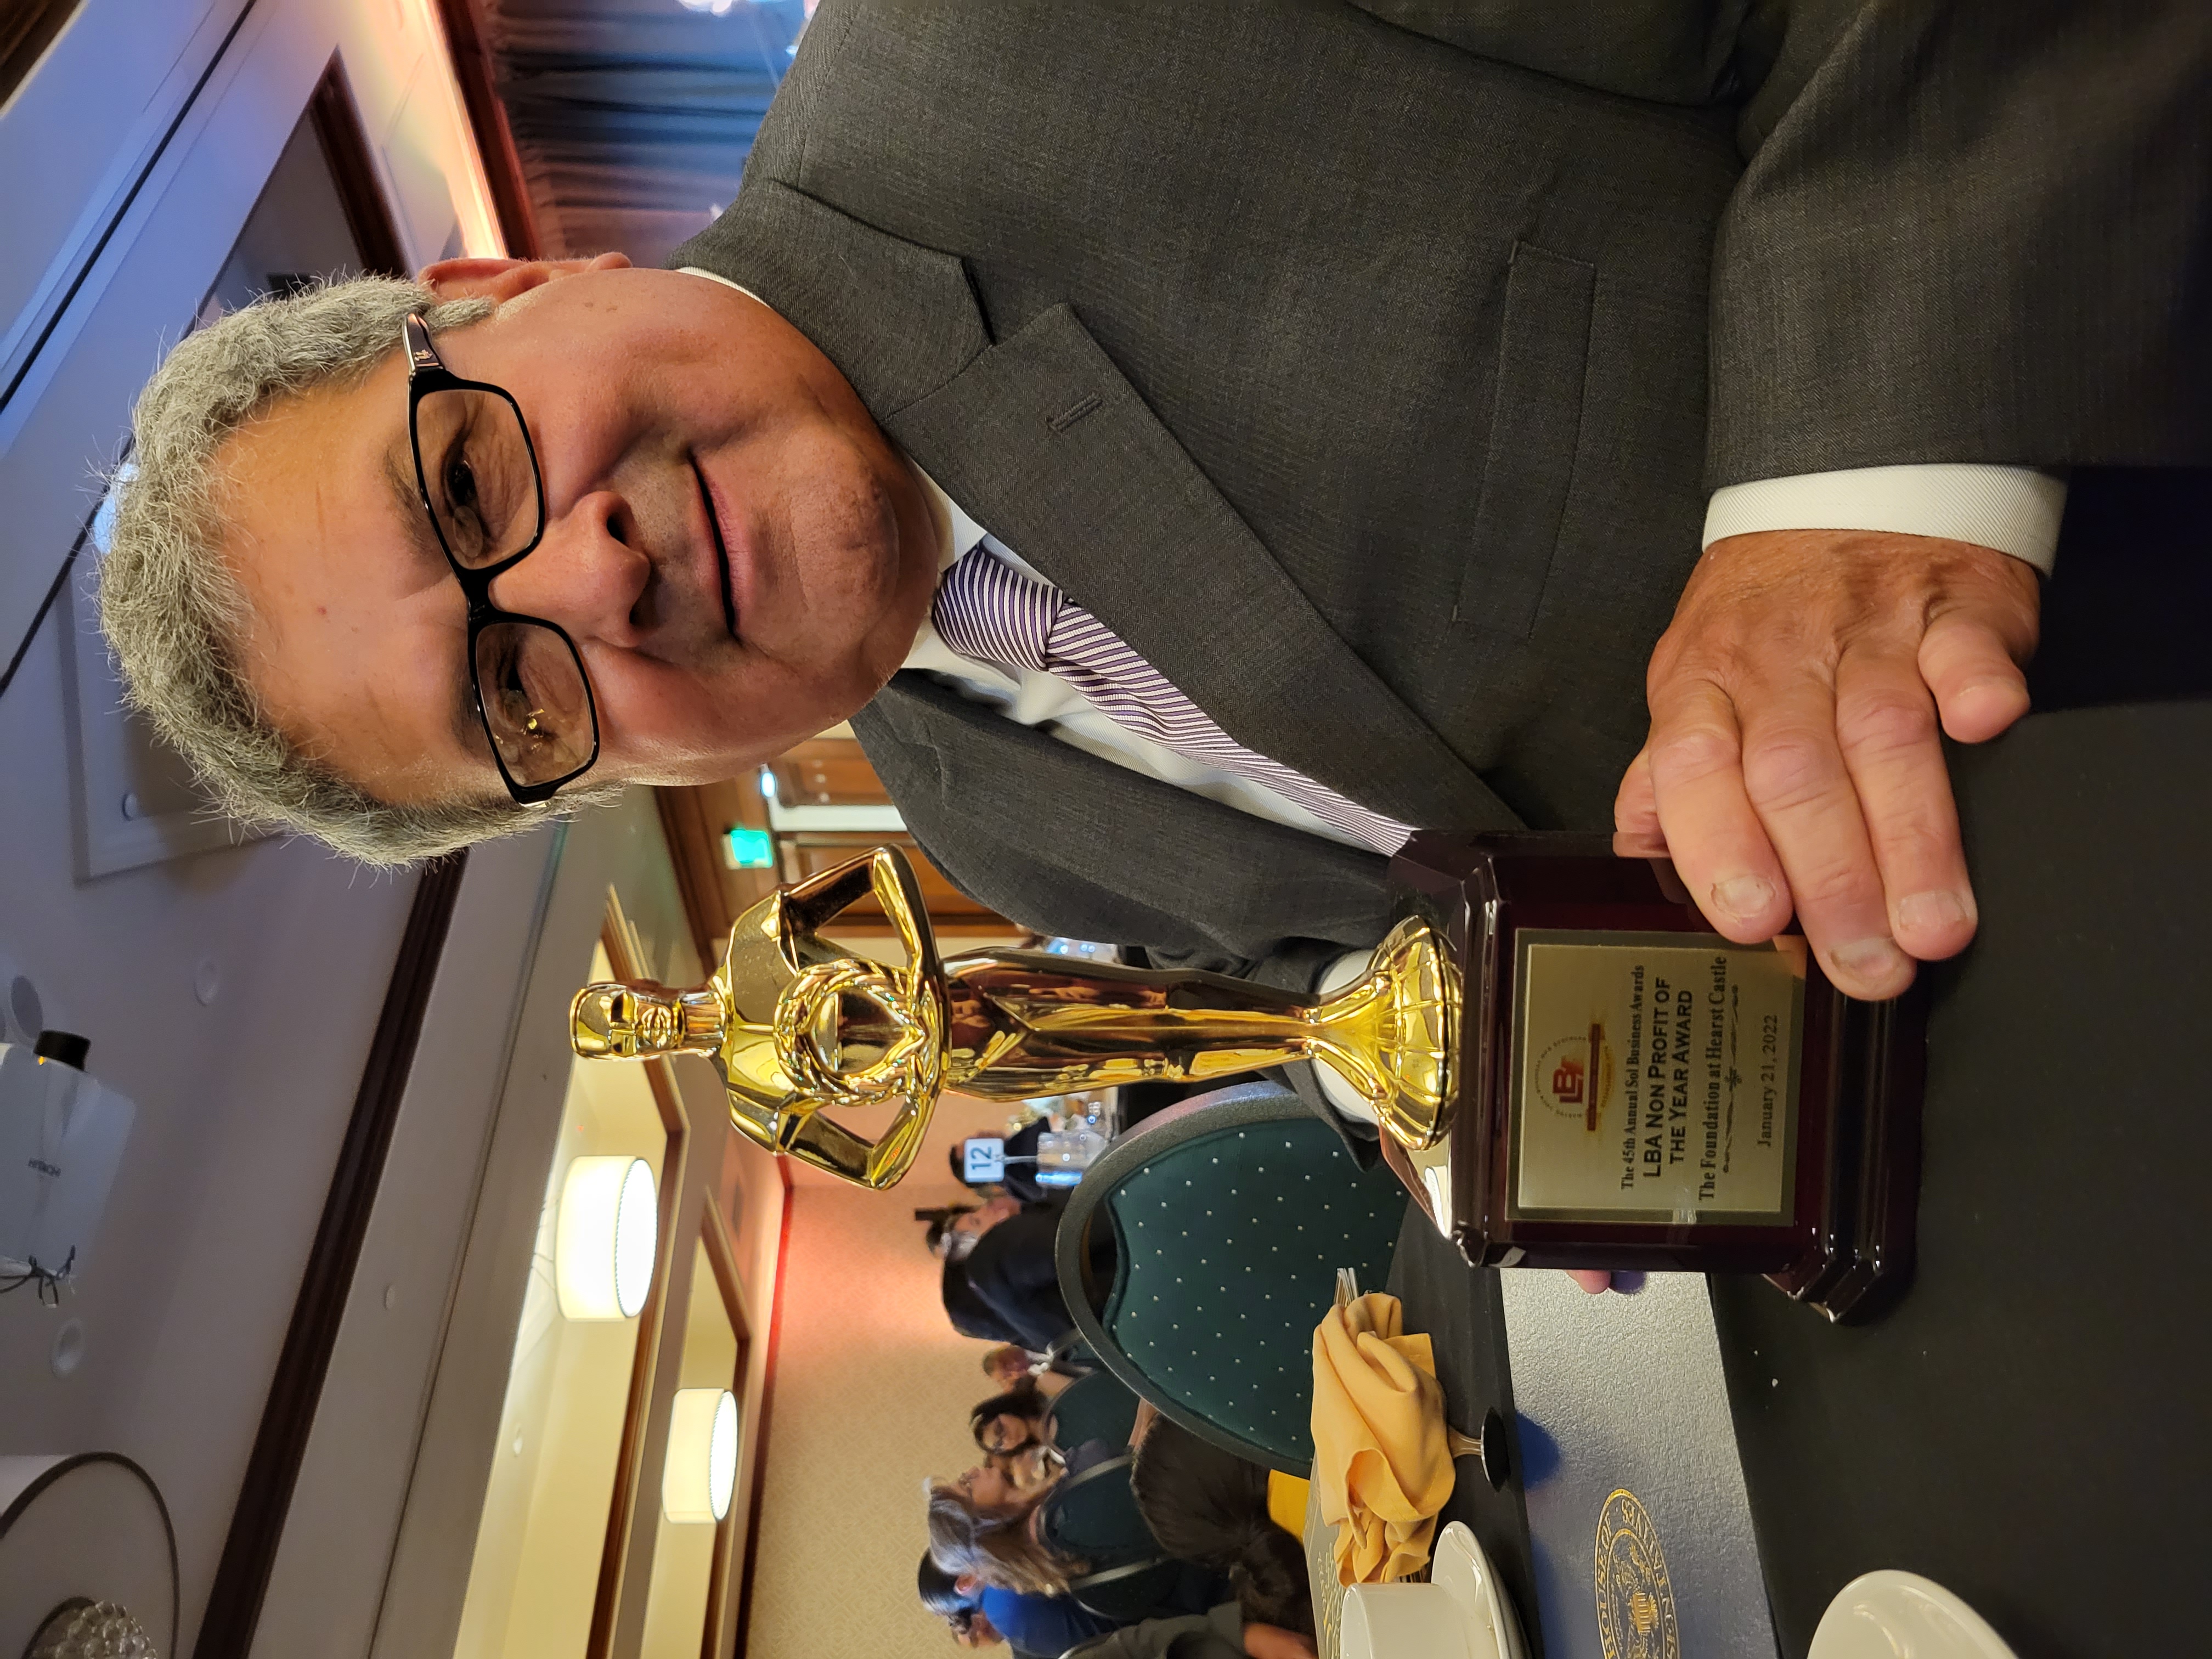 President of the Board Abe Marquez hold the award for "Nonprofit of the Year."